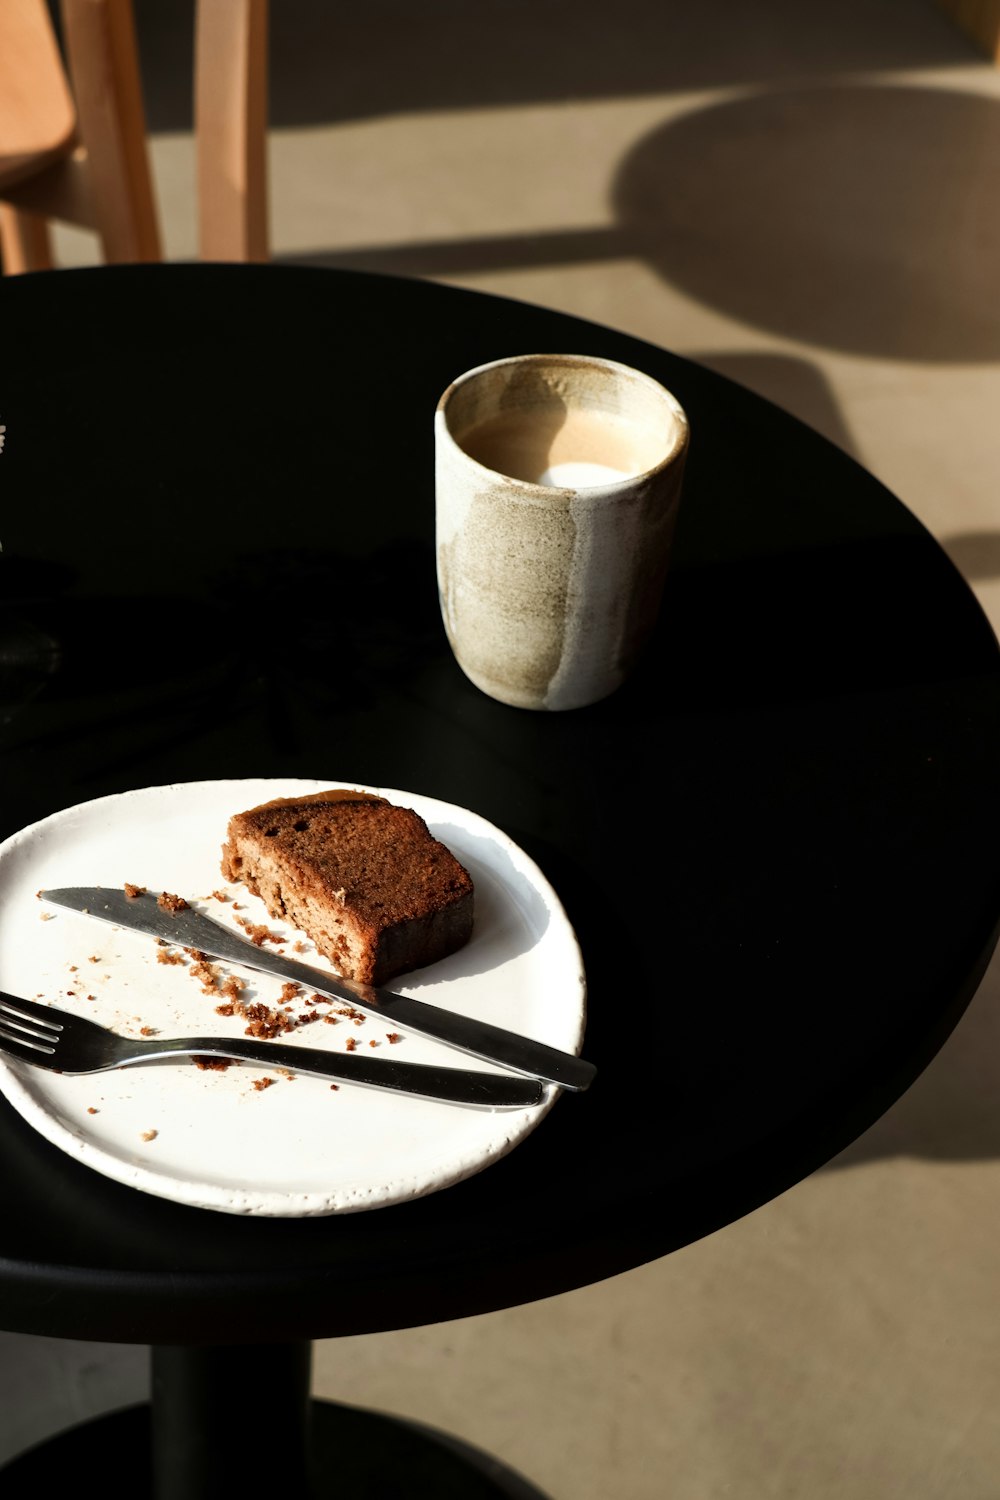 a plate with a piece of cake on it next to a cup of coffee